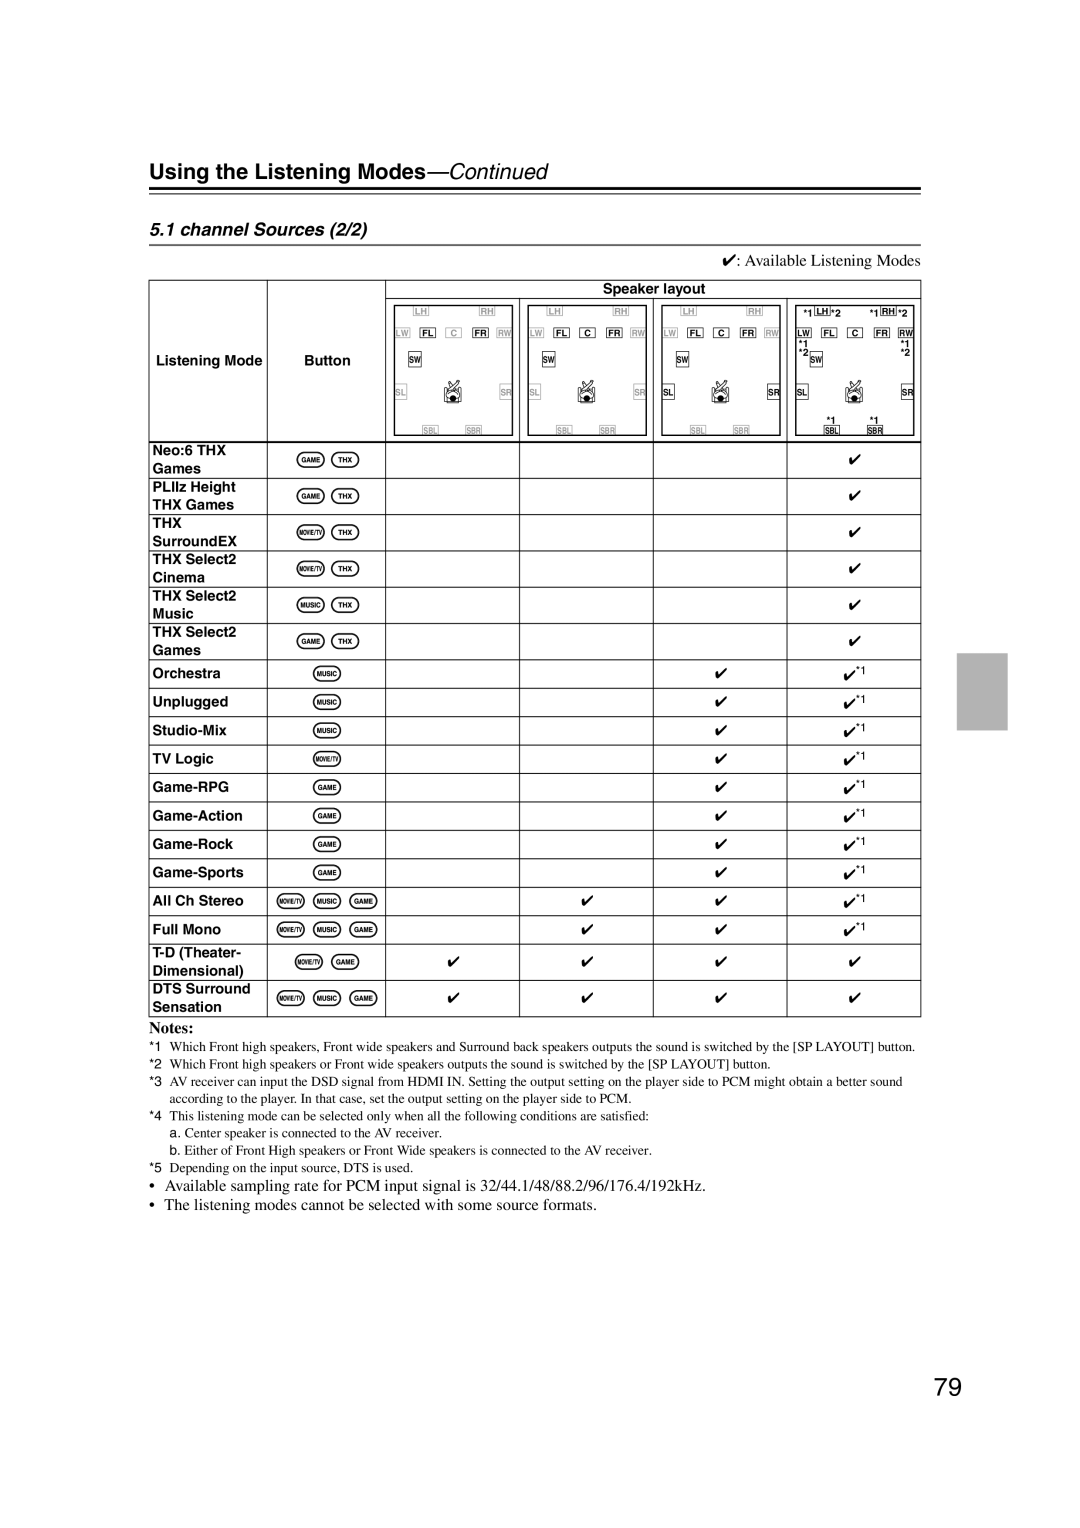 Onkyo HT-RC180, 29400021, TX-NR807 instruction manual channel Sources 2/2, Using the Listening Modes—Continued, Notes 